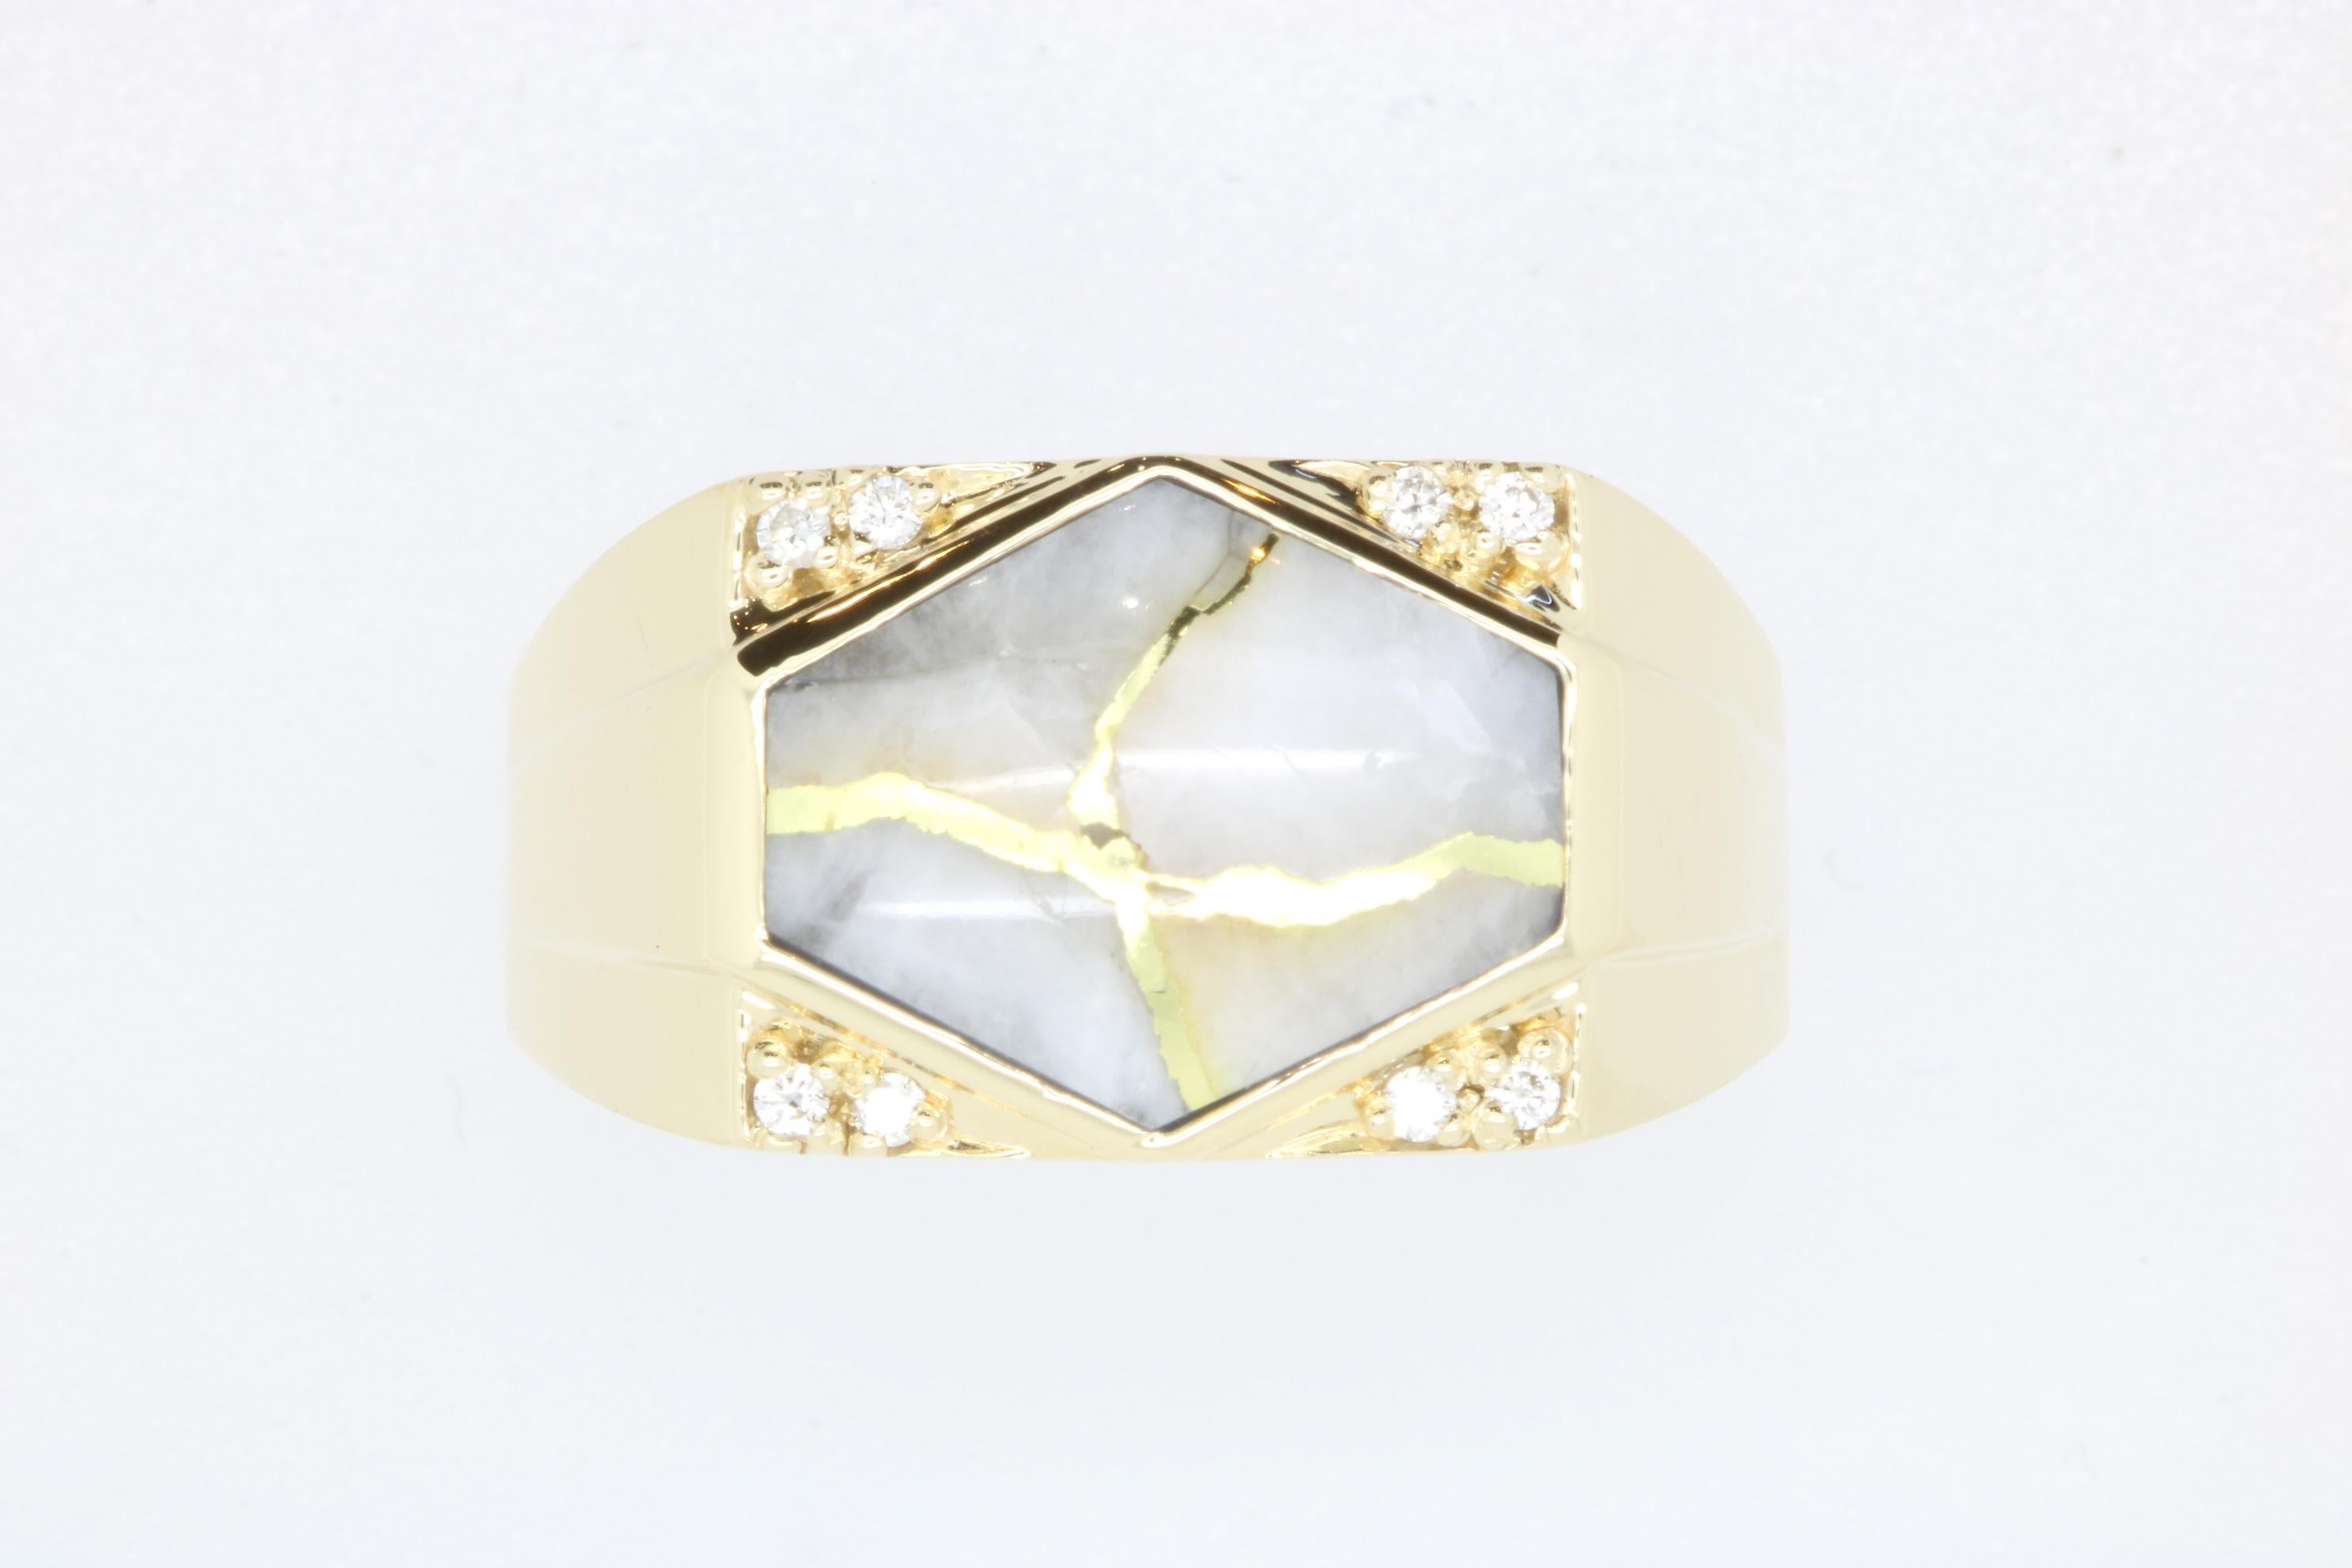 This unique Gold in Quartz stone weighs in at 4.55 carats. Set in a 14k Yellow Gold with 8 white diamonds, this unique Hexagon shaped stone is a guaranteed show stopper!

Material: 14k Yellow Gold
Gemstones: 1 Hexagon Gold in Quartz at 4.55